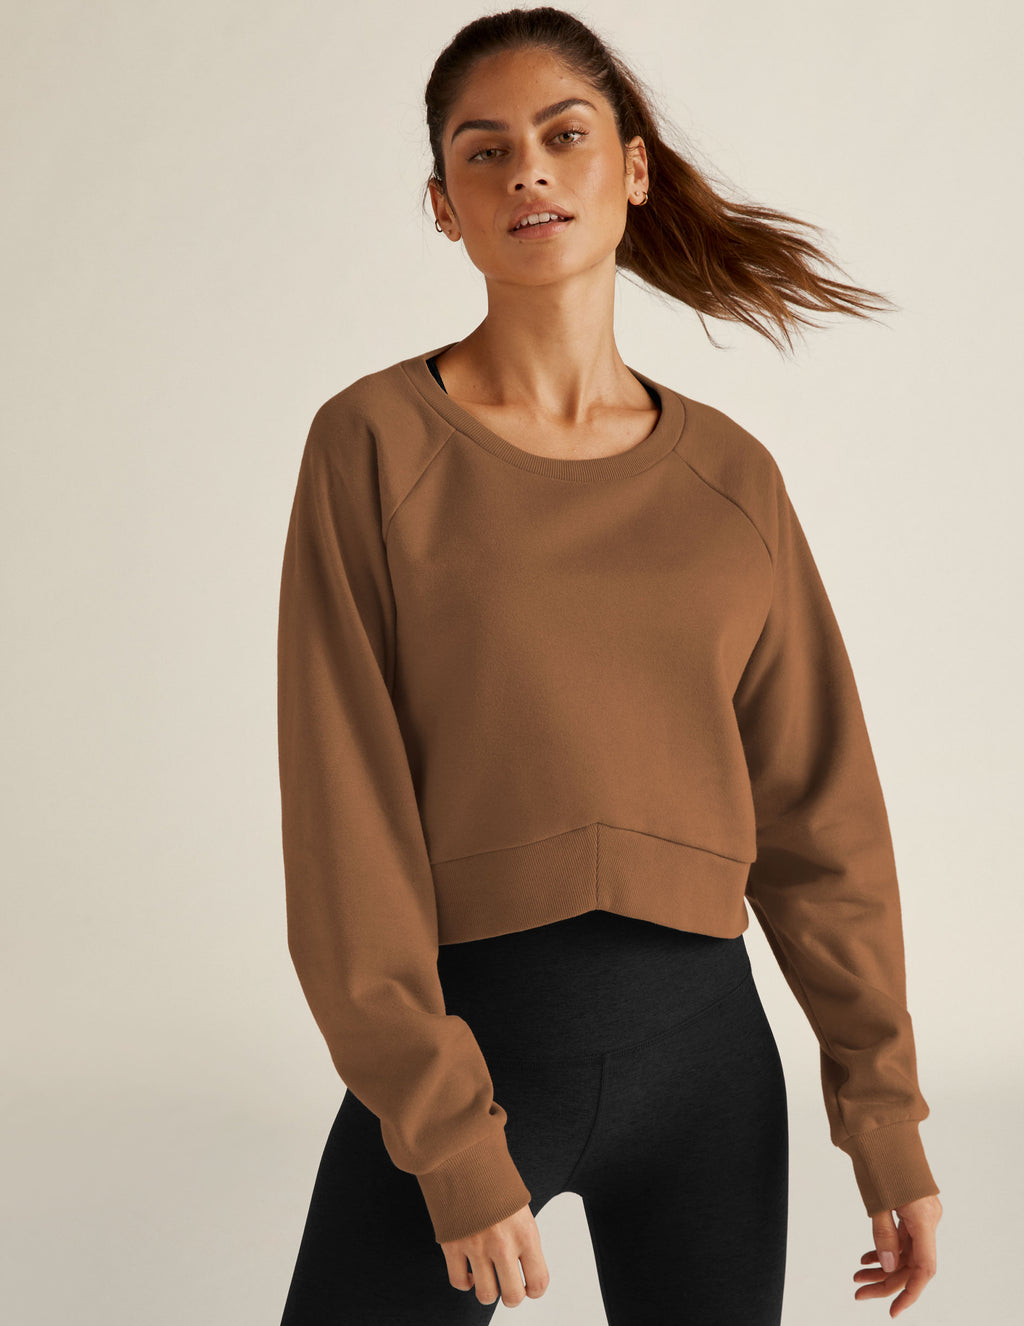 Uplift Cropped Pullover Featured Image